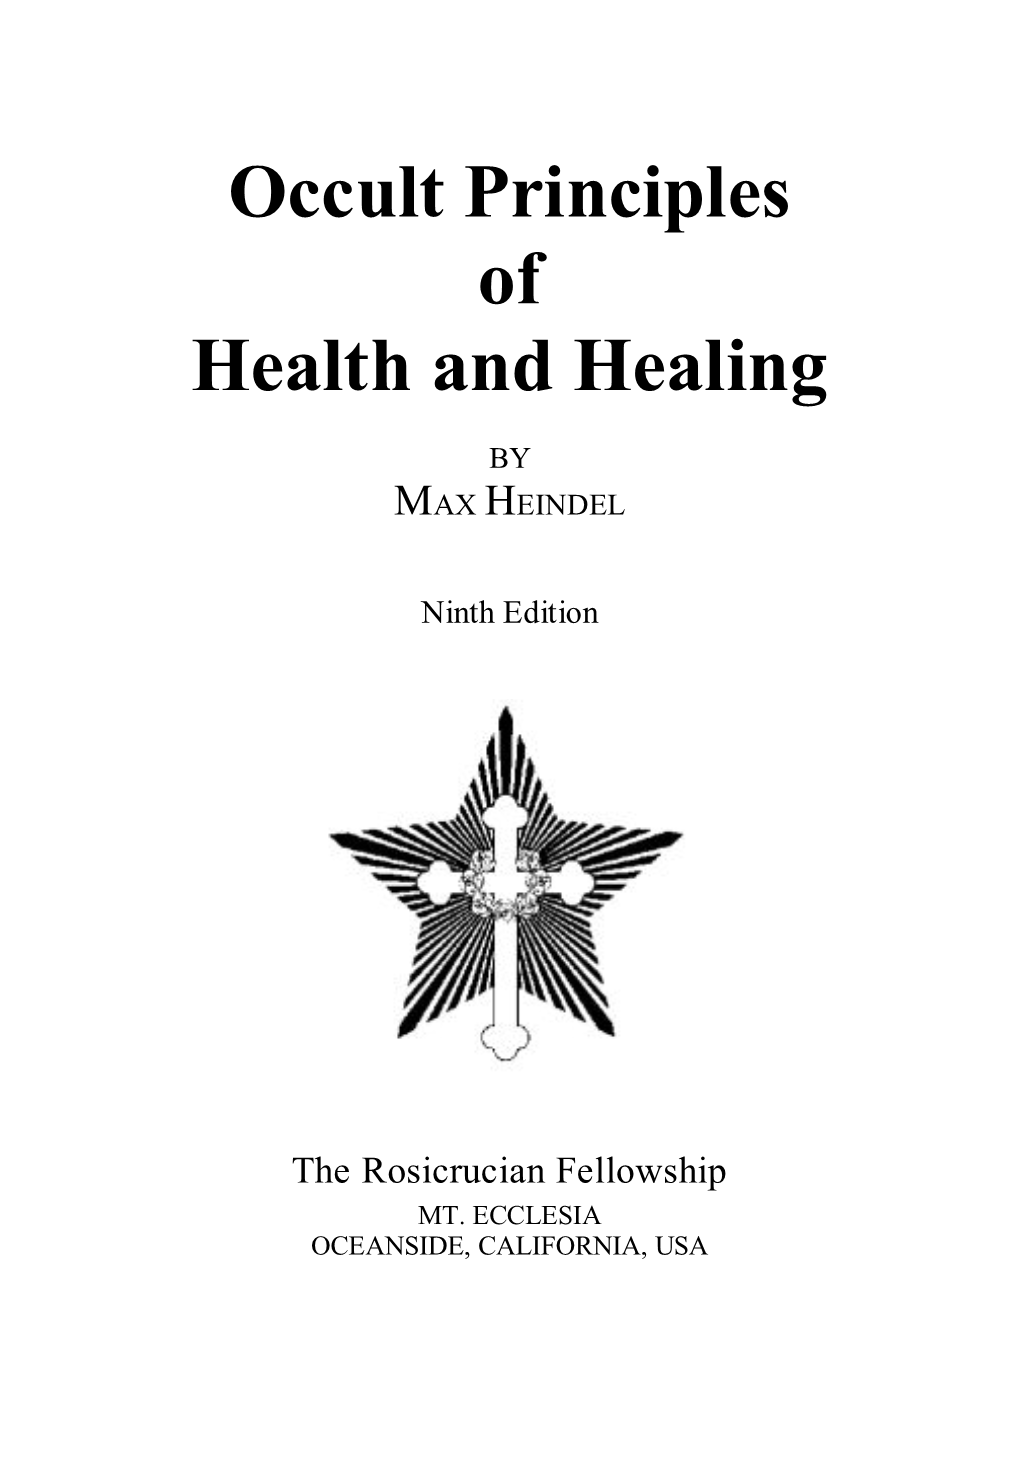 Occult Principles of Health and Healing